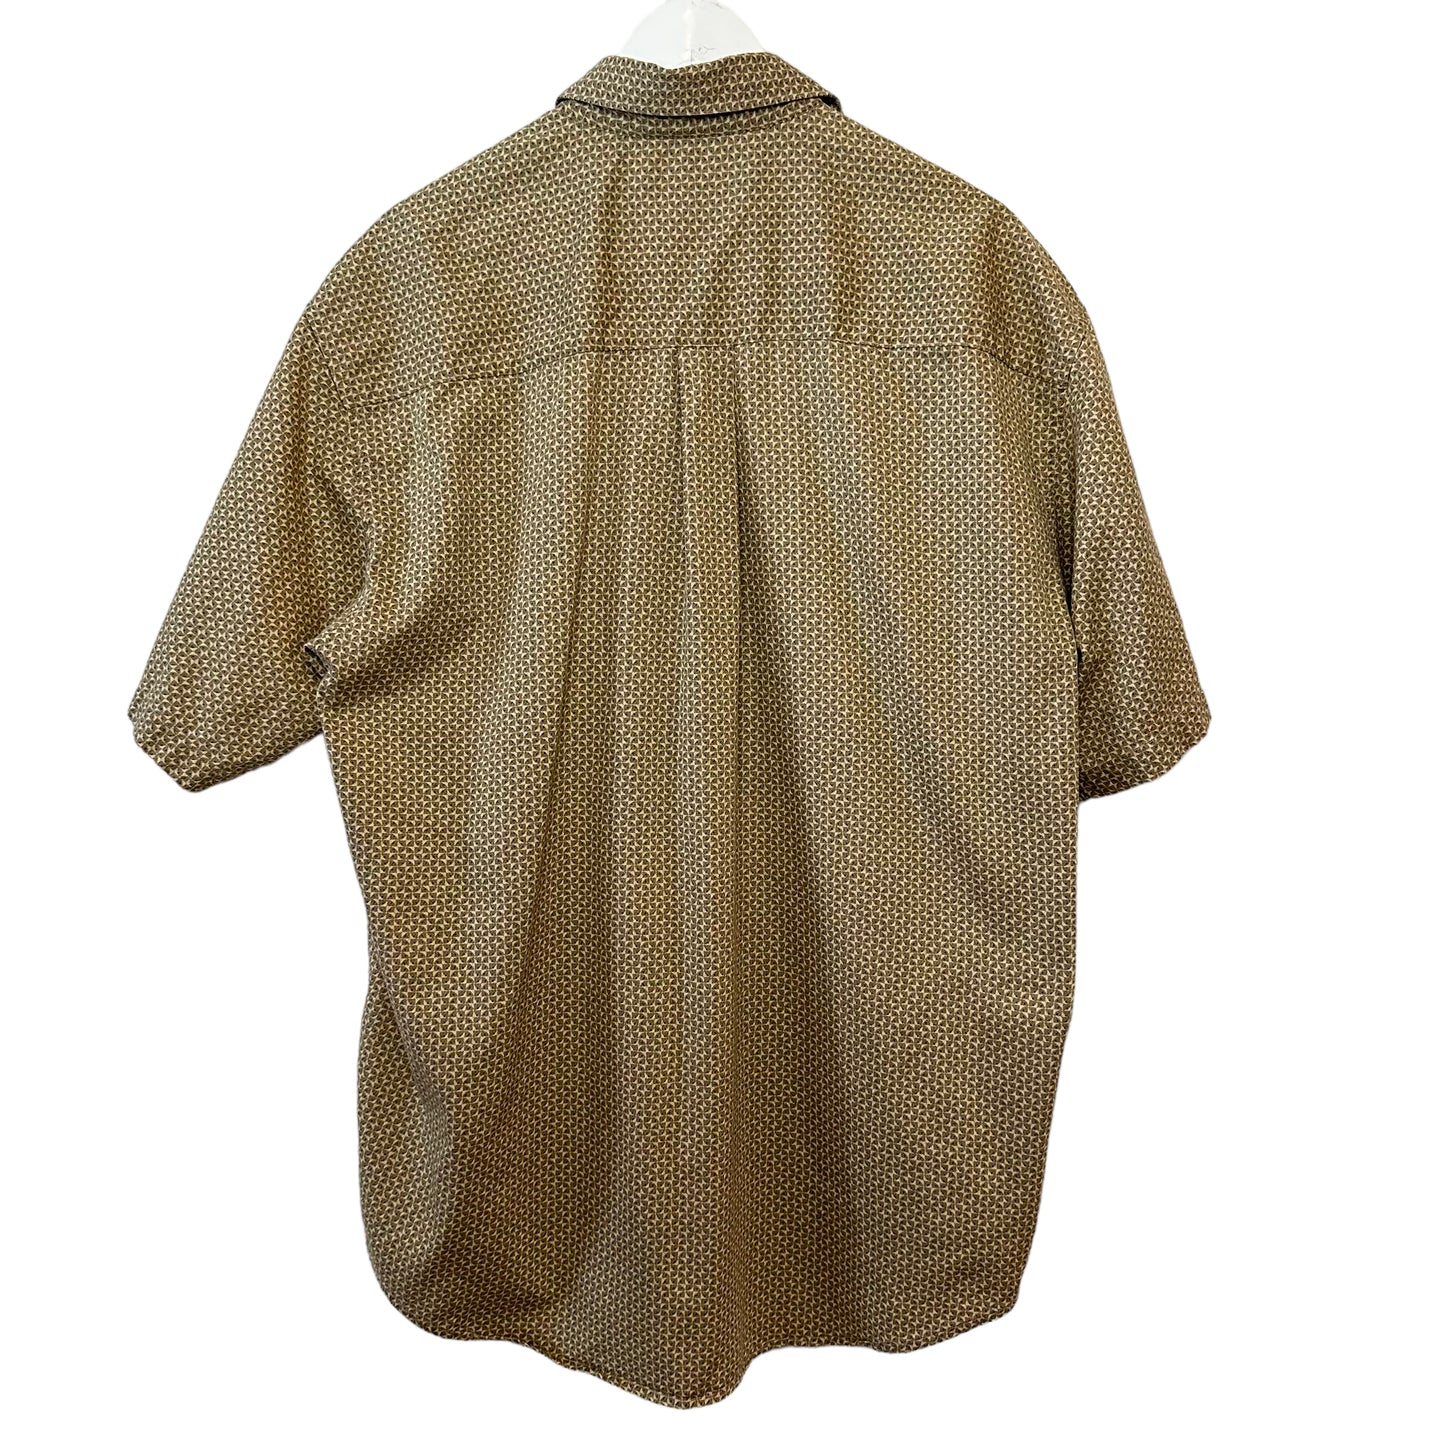 Retro Style Perry Ellis Geometric Pattern Short Sleeve Button Down Collared Shirt Cotton Beige Large